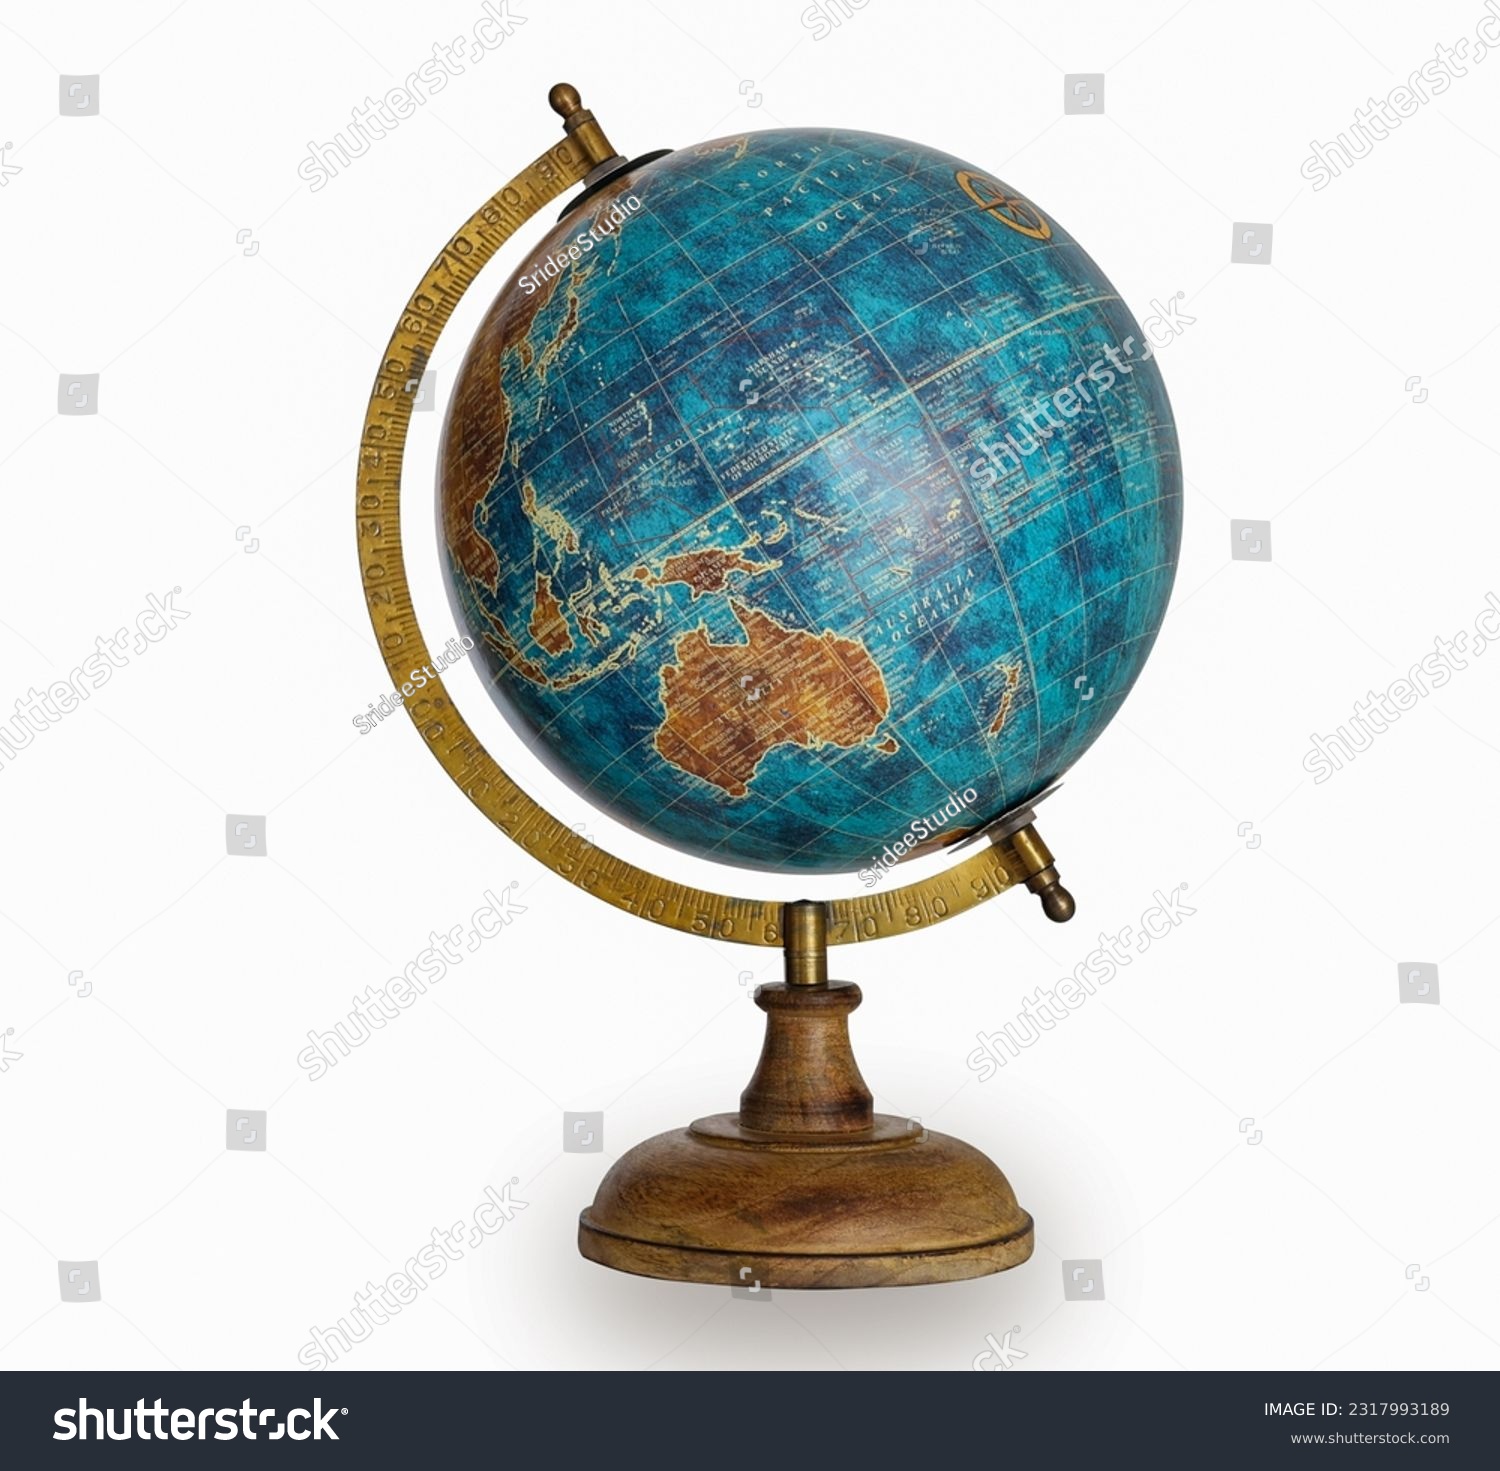 Table world wooden Globe model in blue color isolated on white background. #2317993189